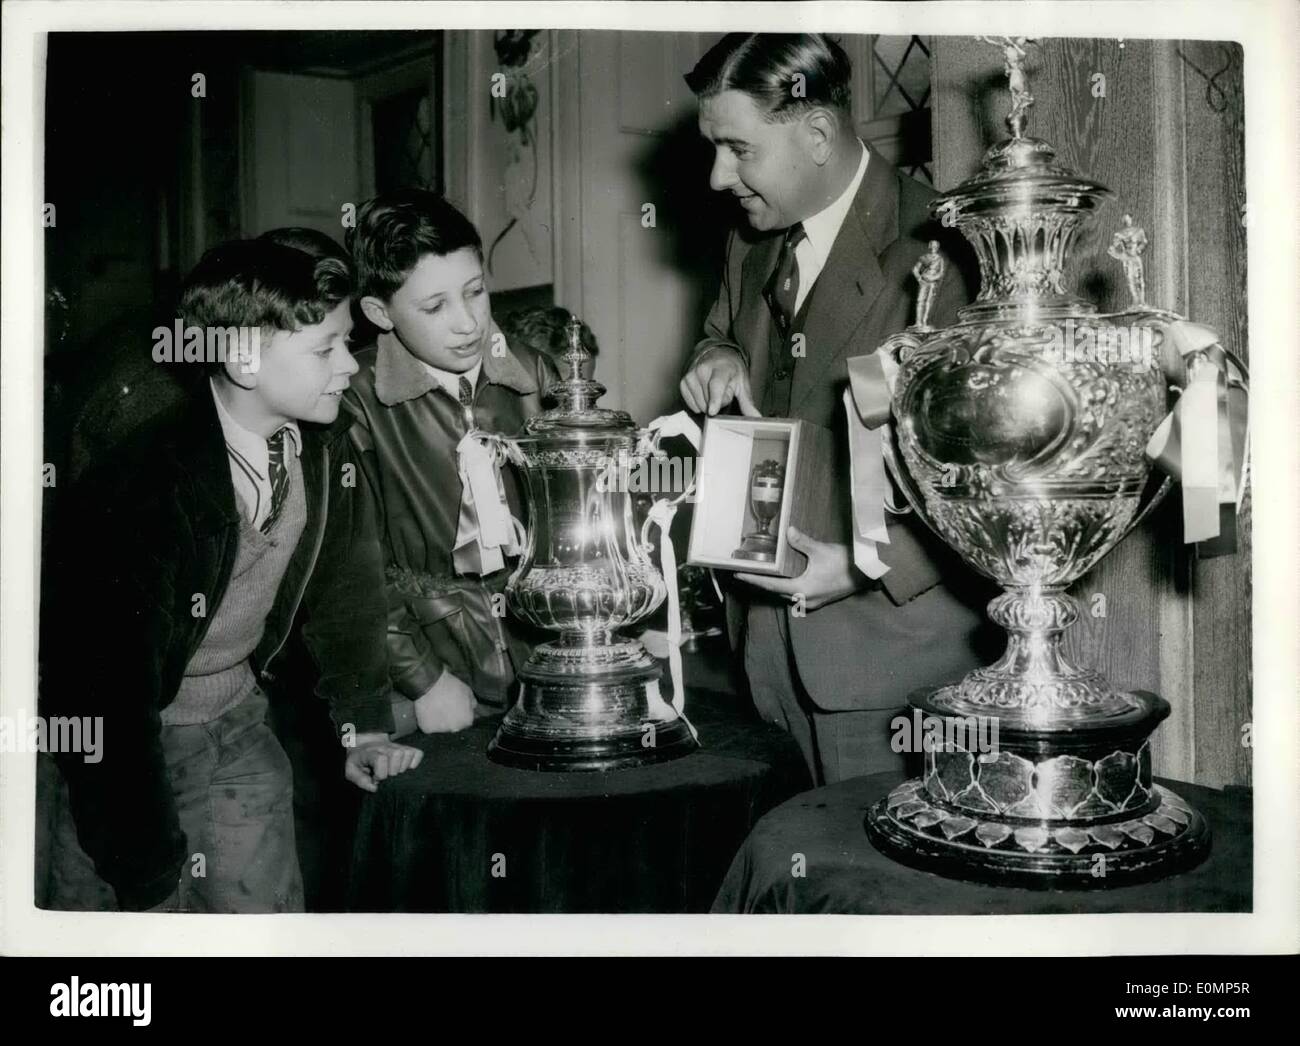 Apr. 04, 1956 - Sports trophies on show in London: The national association of Boy's clubs are holding an exhibition at the cafe Anglais, at which some of Britain's greatest sports trophies are on shows photo shows Colin cowdry, the famous cricketer, who opened the exhibition is seen showing the ashed to Alfred wick, 14, on left, and Robert burnand, 14, of the Brunswick boy's club, fulham. On either side of the ashes can be see the f.a cup (left) and the rugby league cup (right) Stock Photo